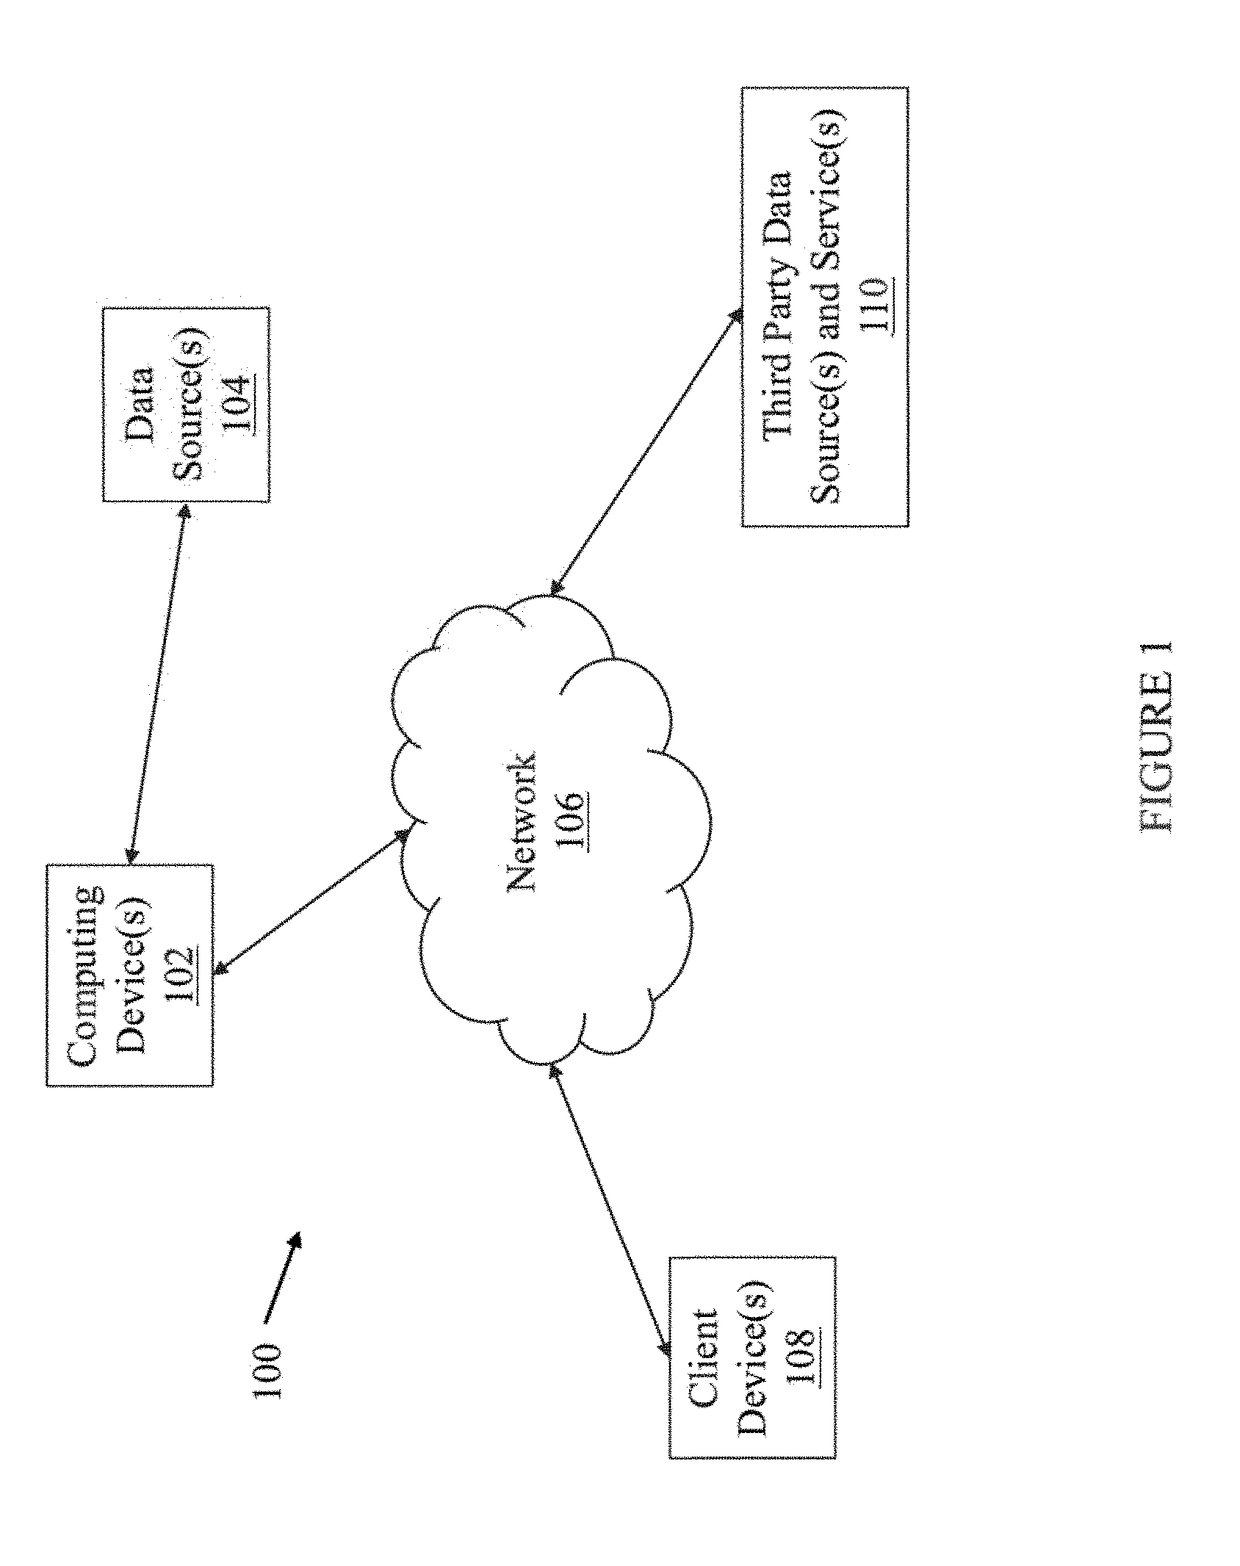 System and method for monitoring and analyzing animal related data